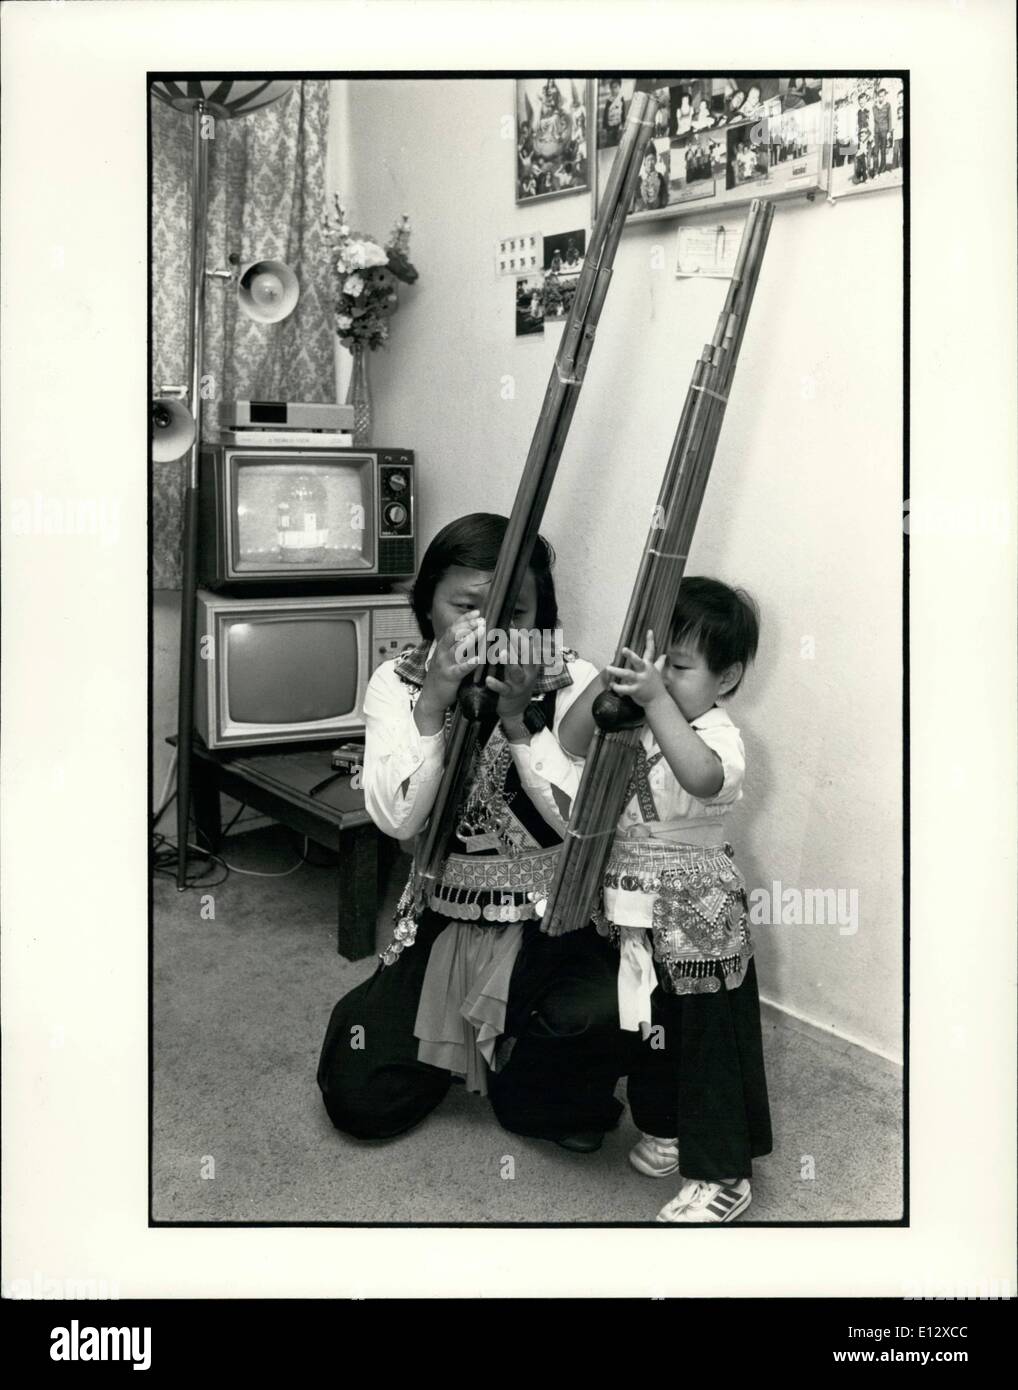 Feb. 26, 2012 - United States of America/Merced, Ca/Laotian refugees/Resettlement Adapting to their new life while maintaining their traditions: here, a Hmong ''Choukan'' or music man is teaching his son to play the flute. Stock Photo